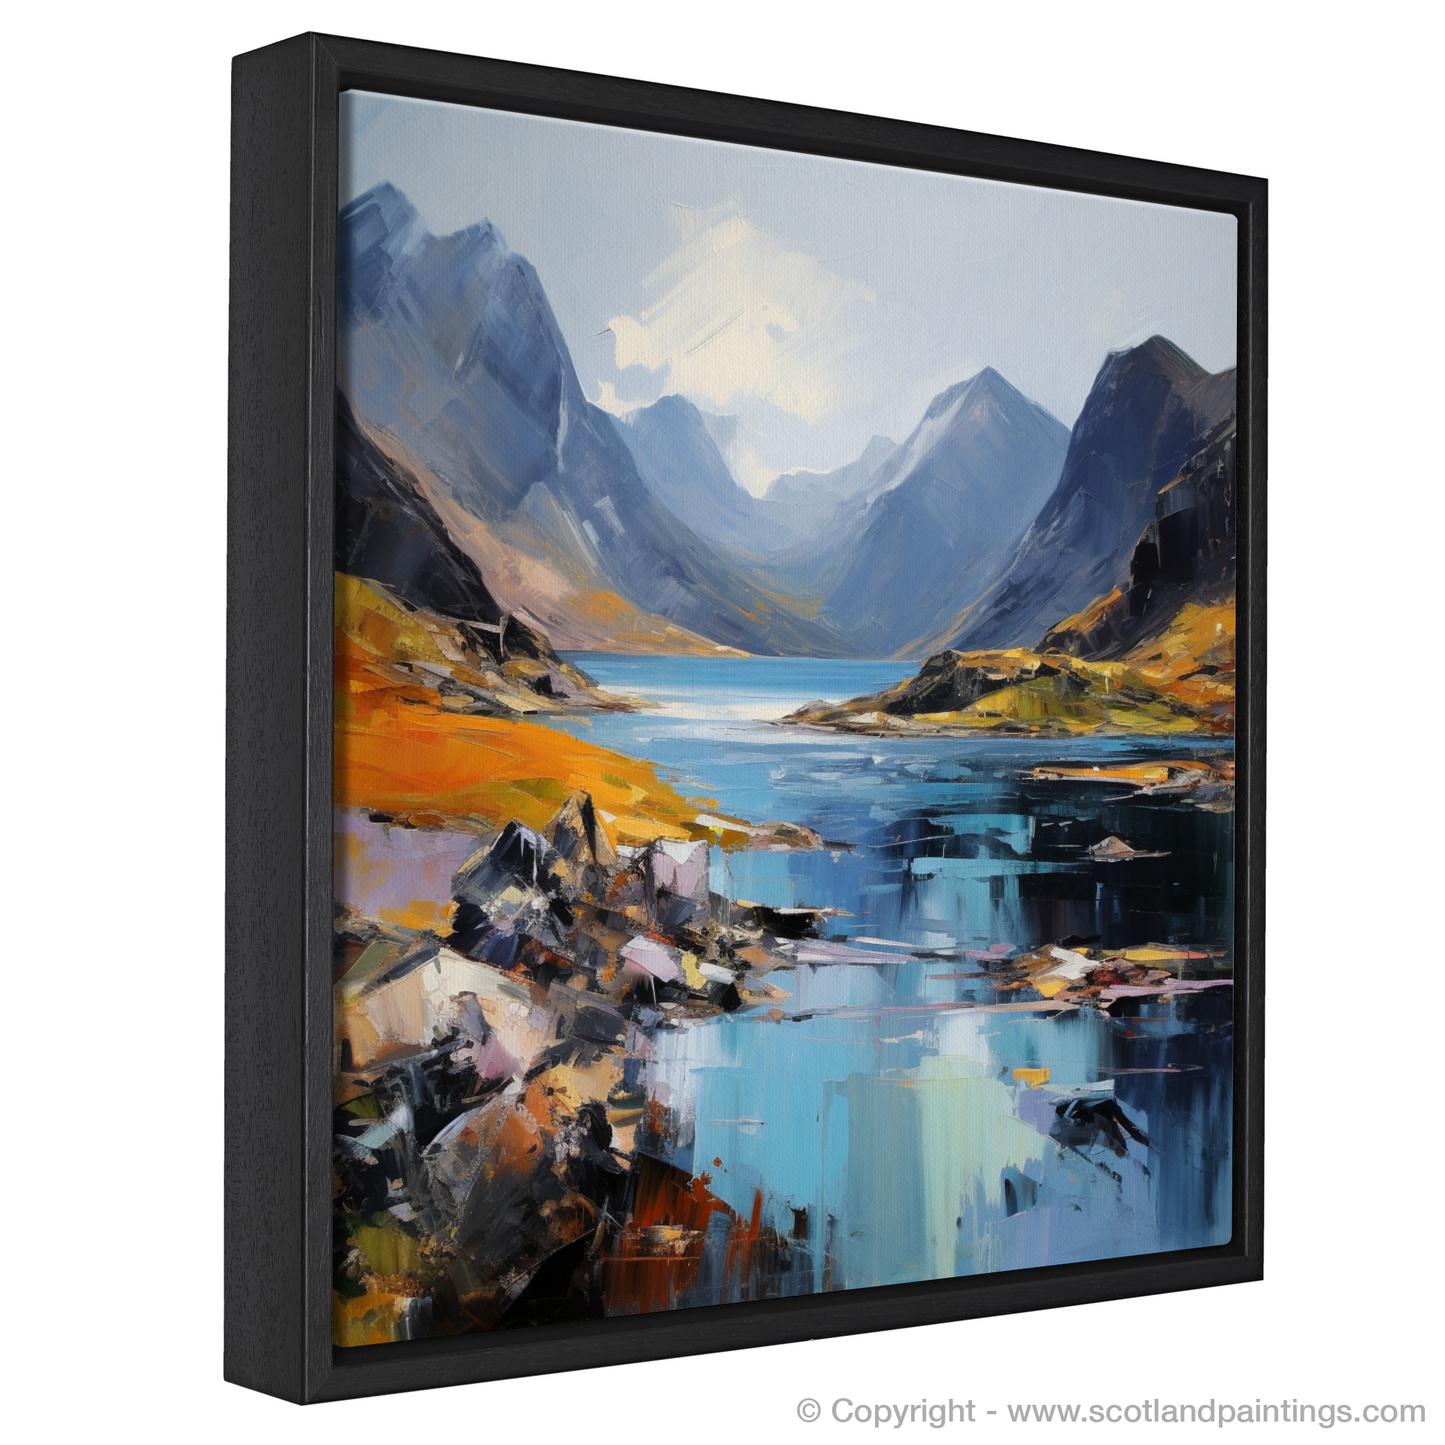 Painting and Art Print of Loch Coruisk, Isle of Skye entitled "Mystic Echoes of Loch Coruisk".